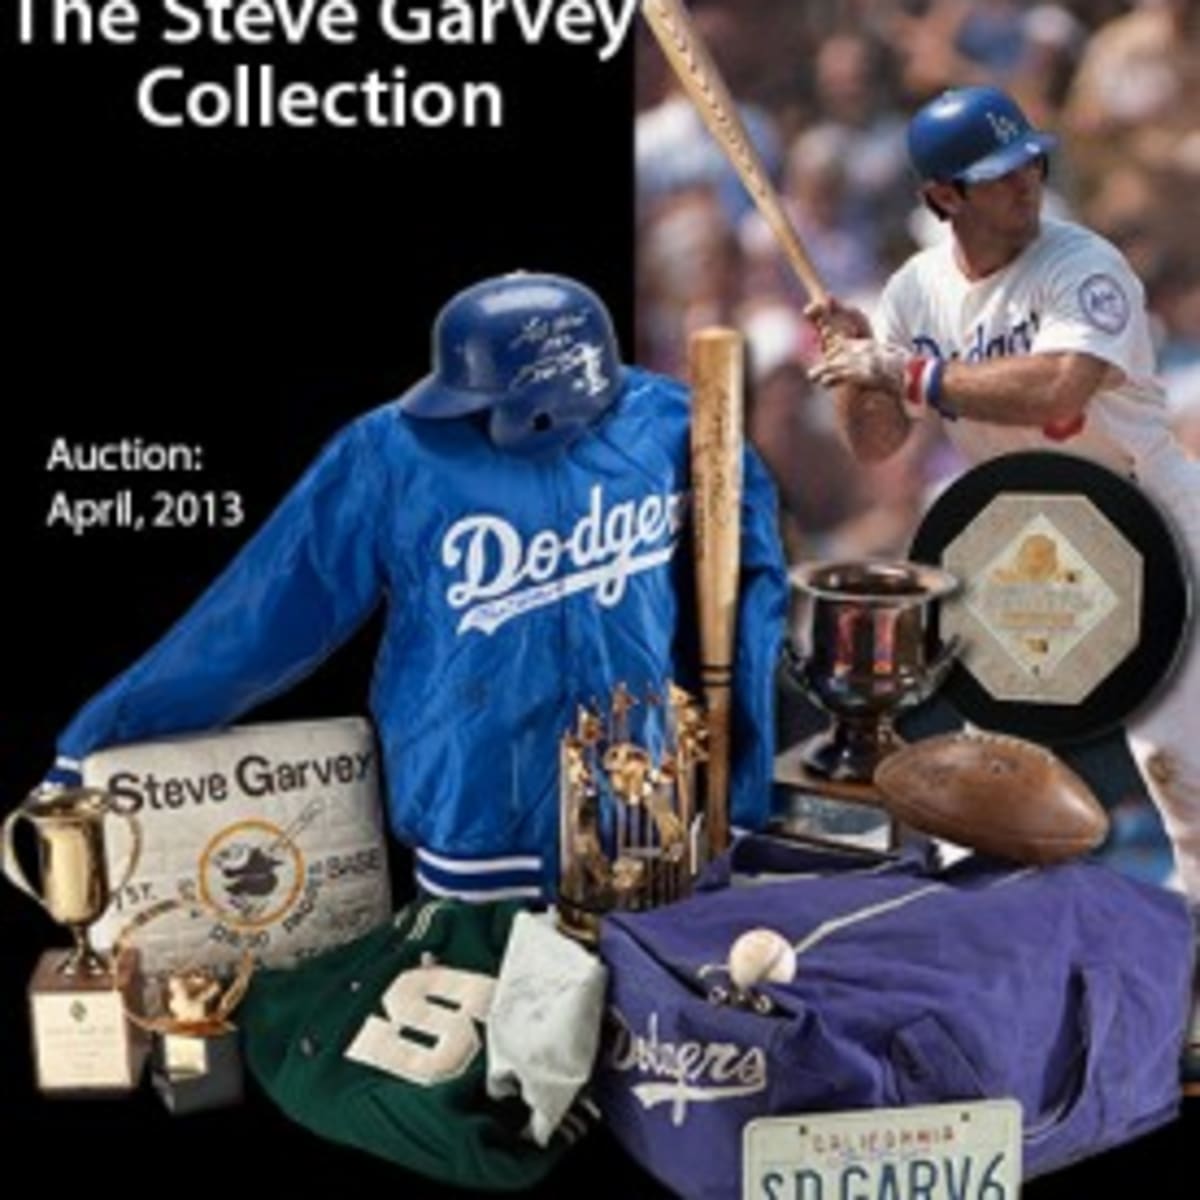 Sons of Steve Garvey: Ping Pong 4 Purpose Action, Part 2